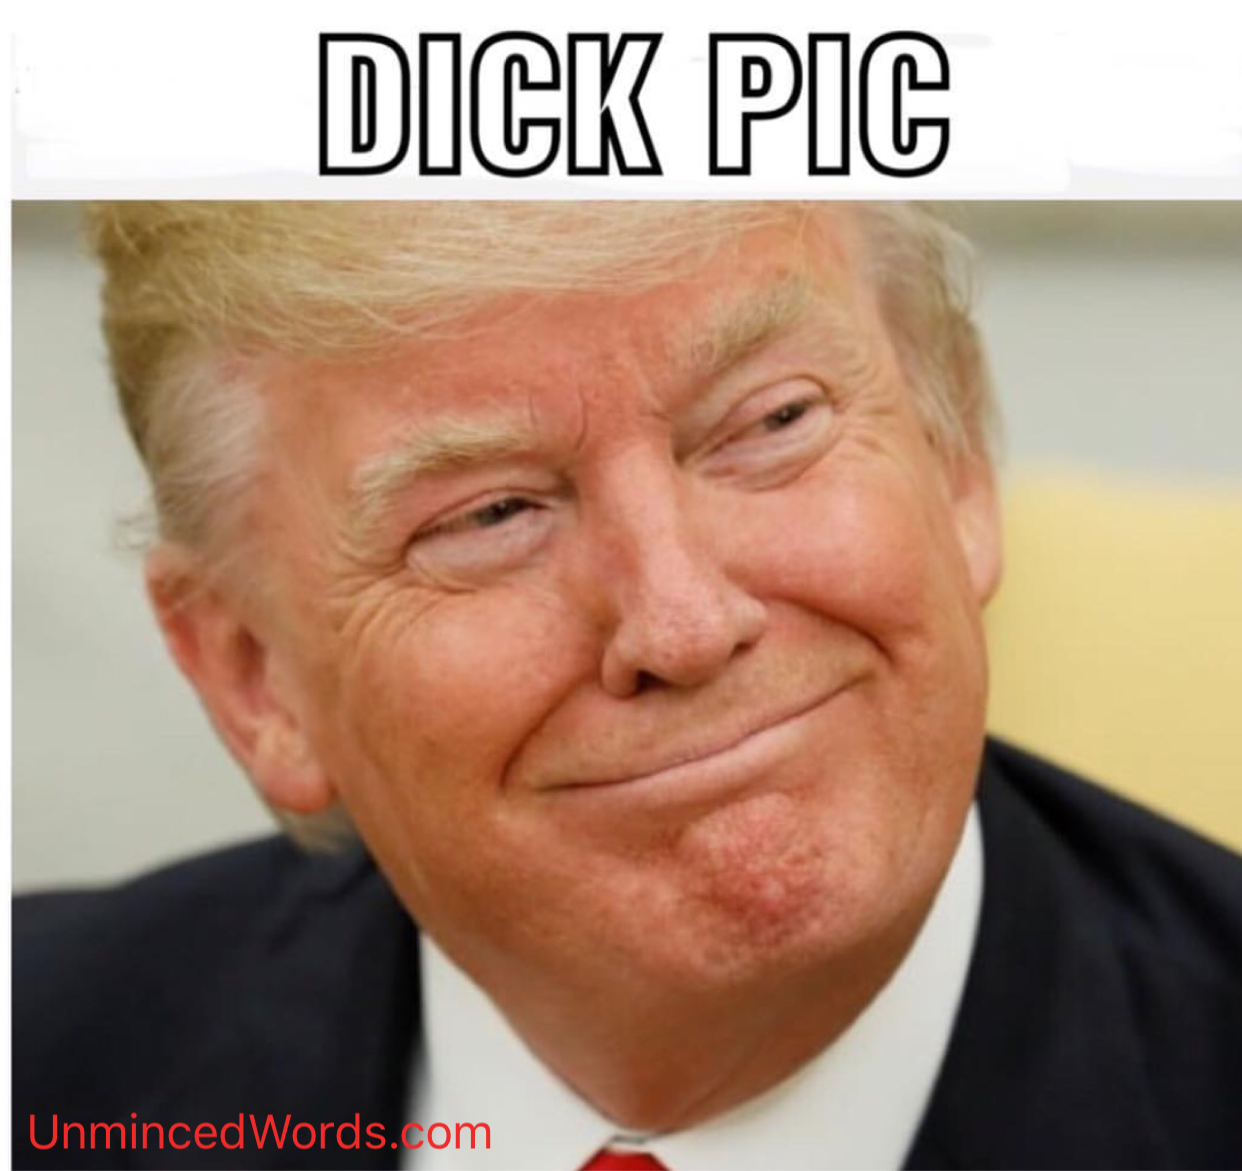 ‪TRUMP MAKES FOR THE ULTIMATE “DICK PIC”.